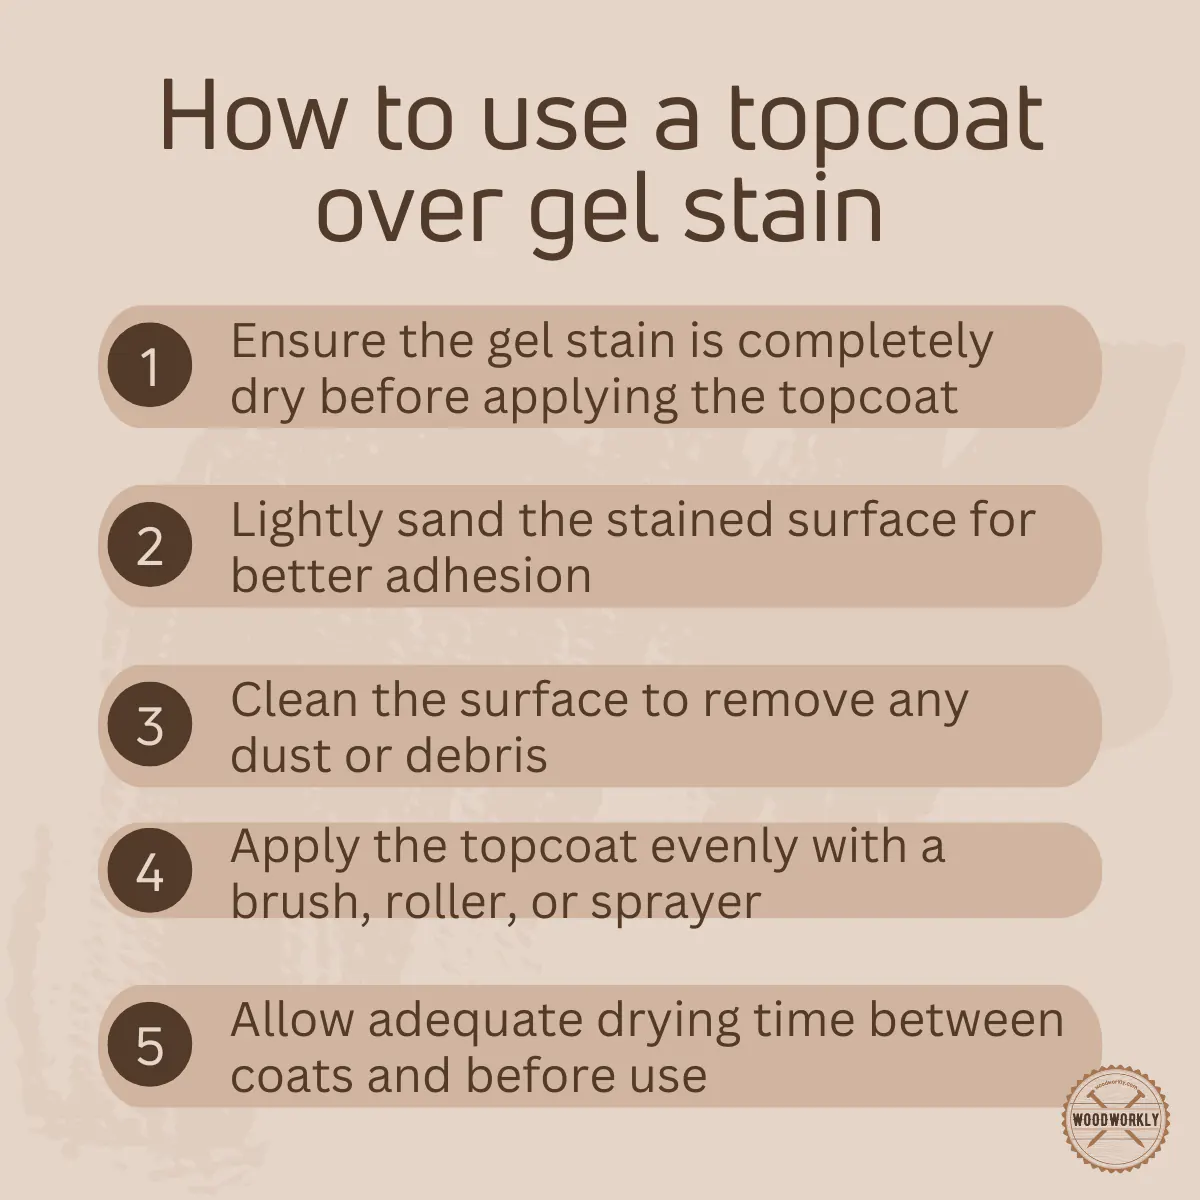 How to use a topcoat over gel stain